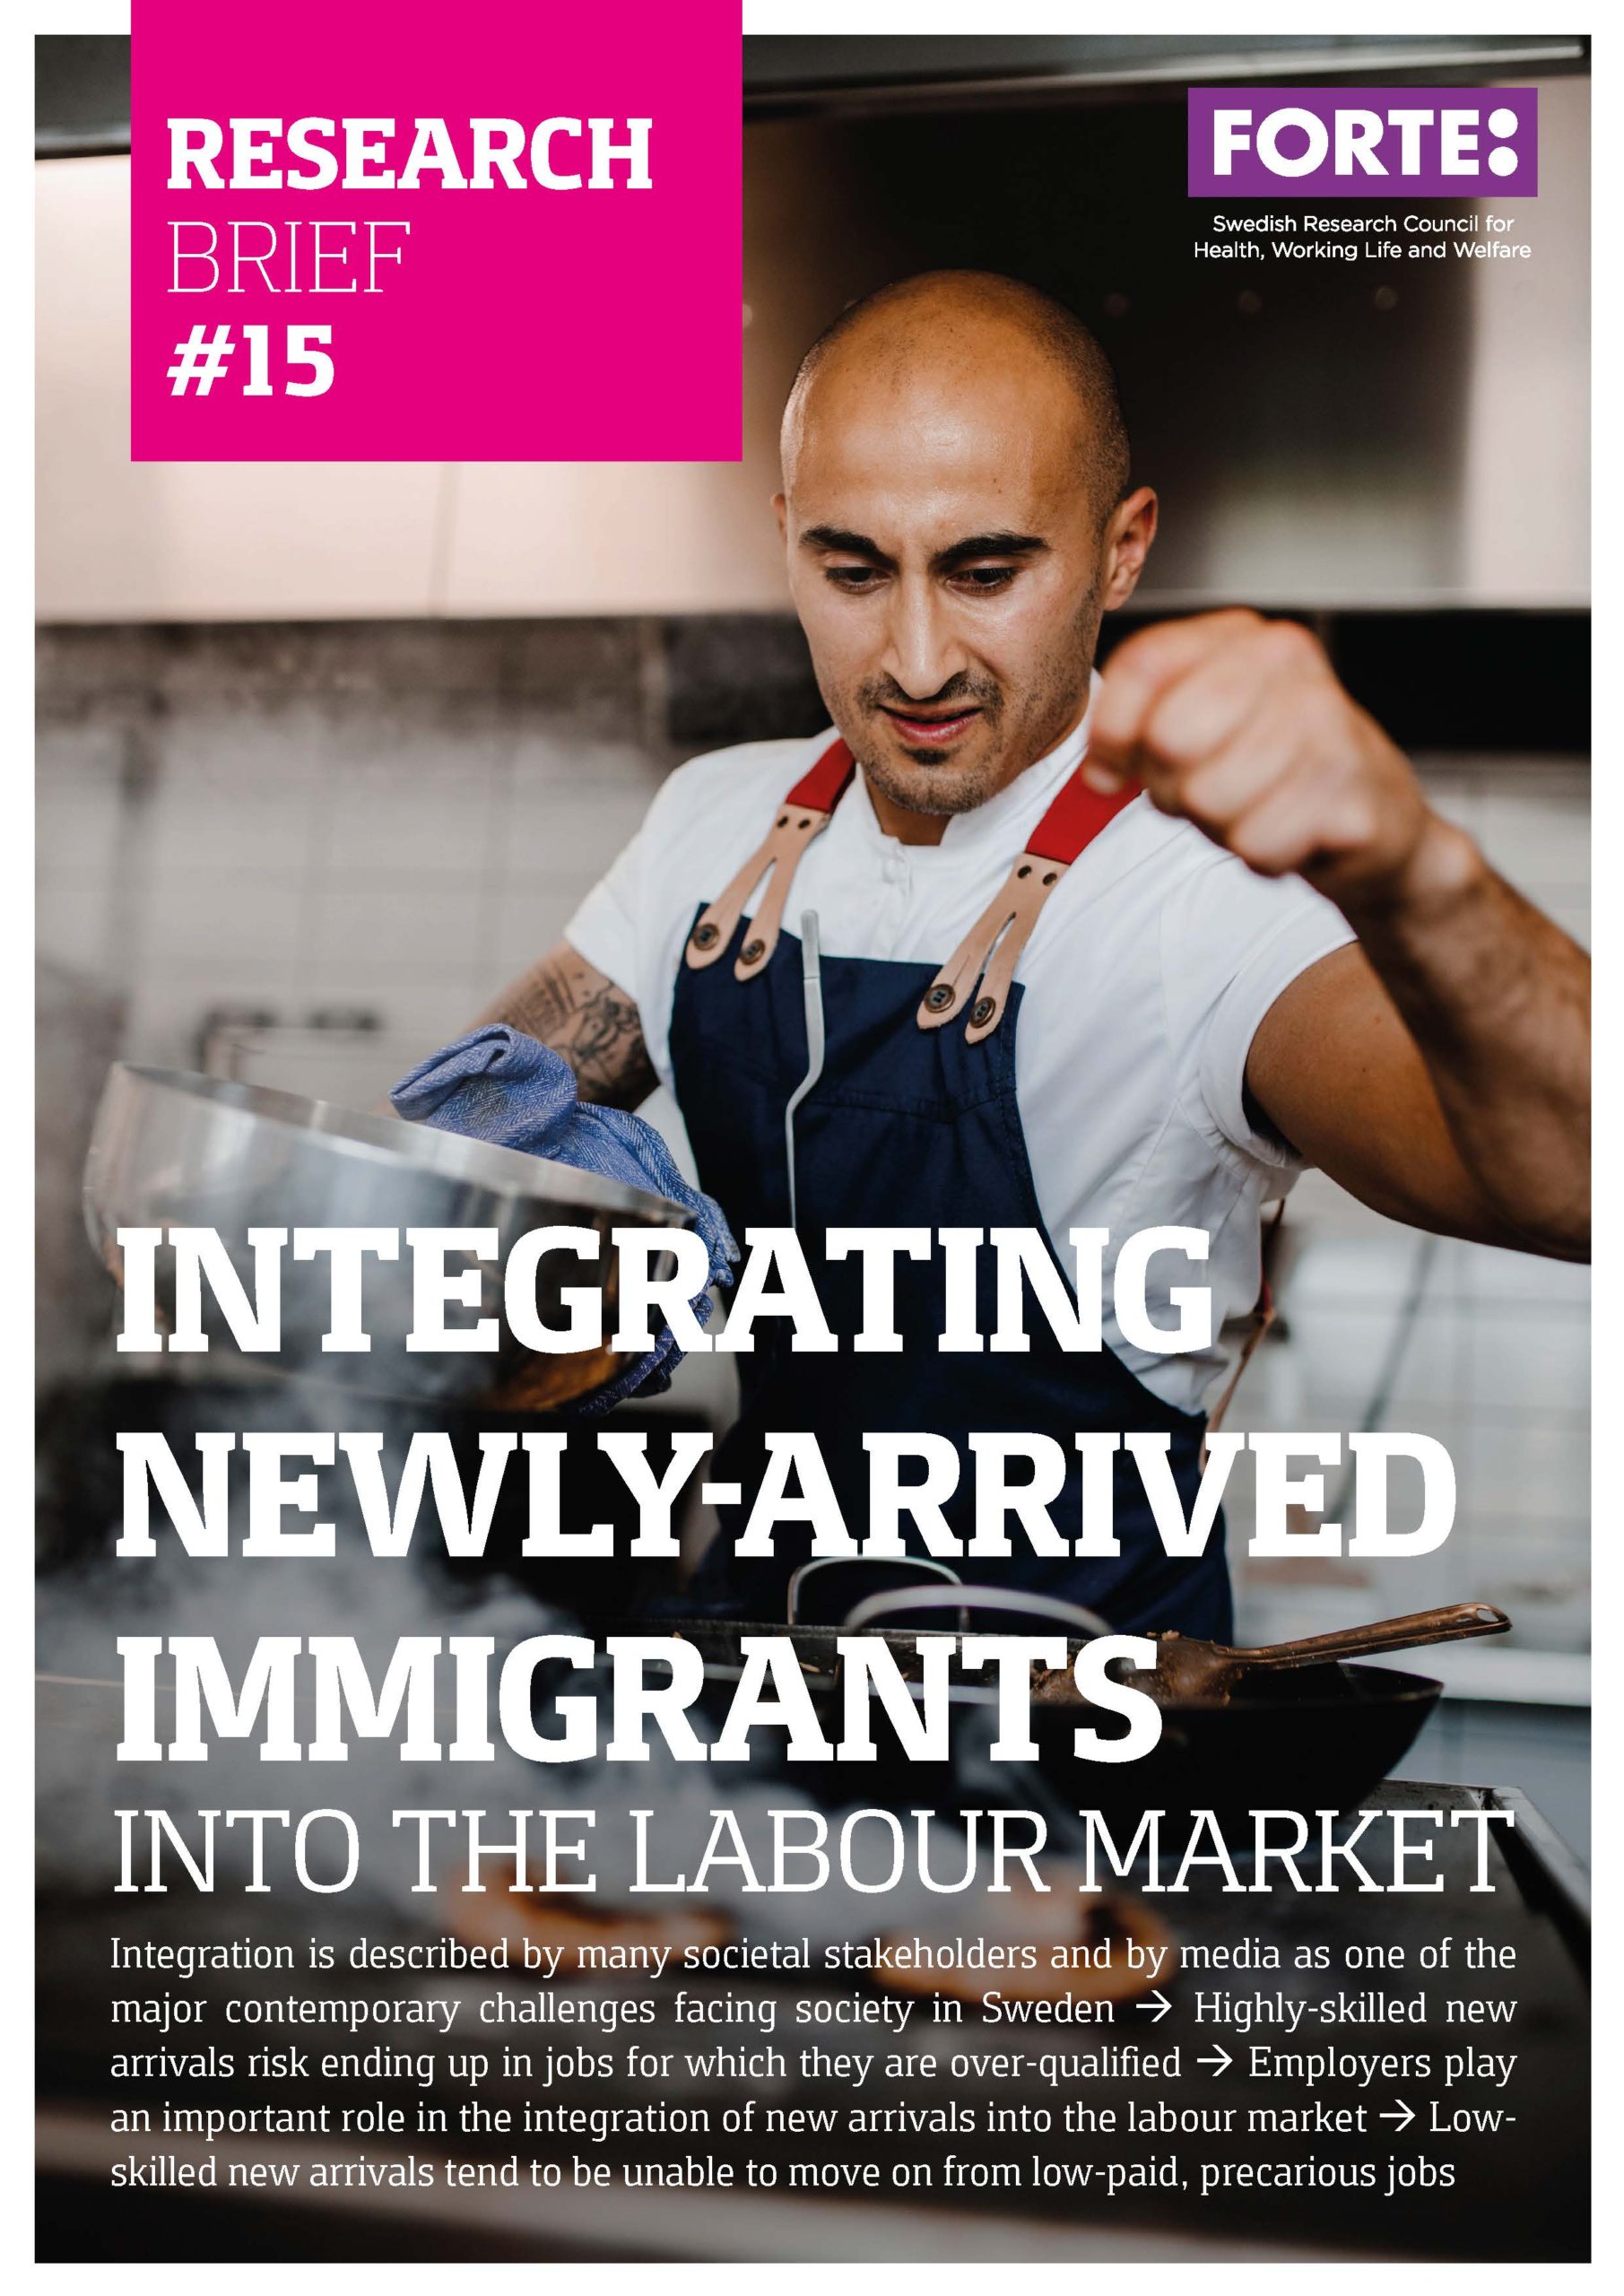 Research Brief: Integrating newly-arrived immigrants into the labour market